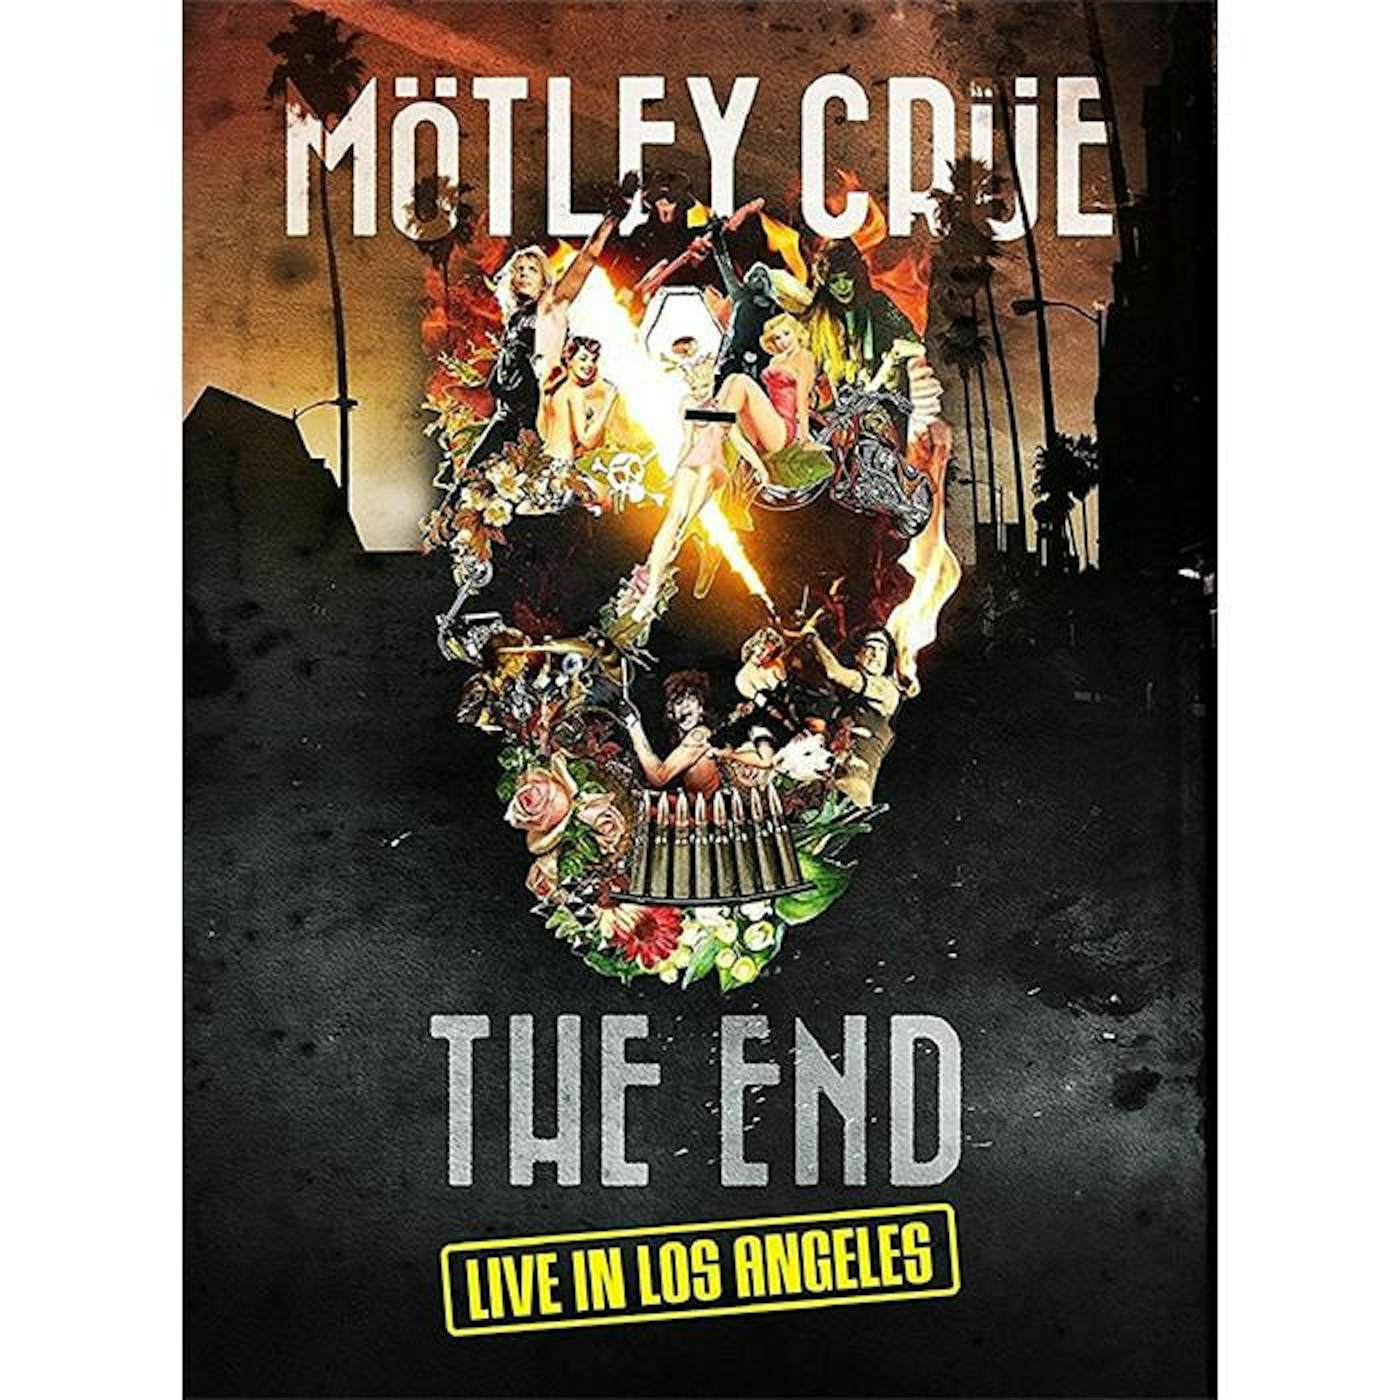 Mötley Crüe THE END: LIVE IN LOS ANGELES Blu-ray